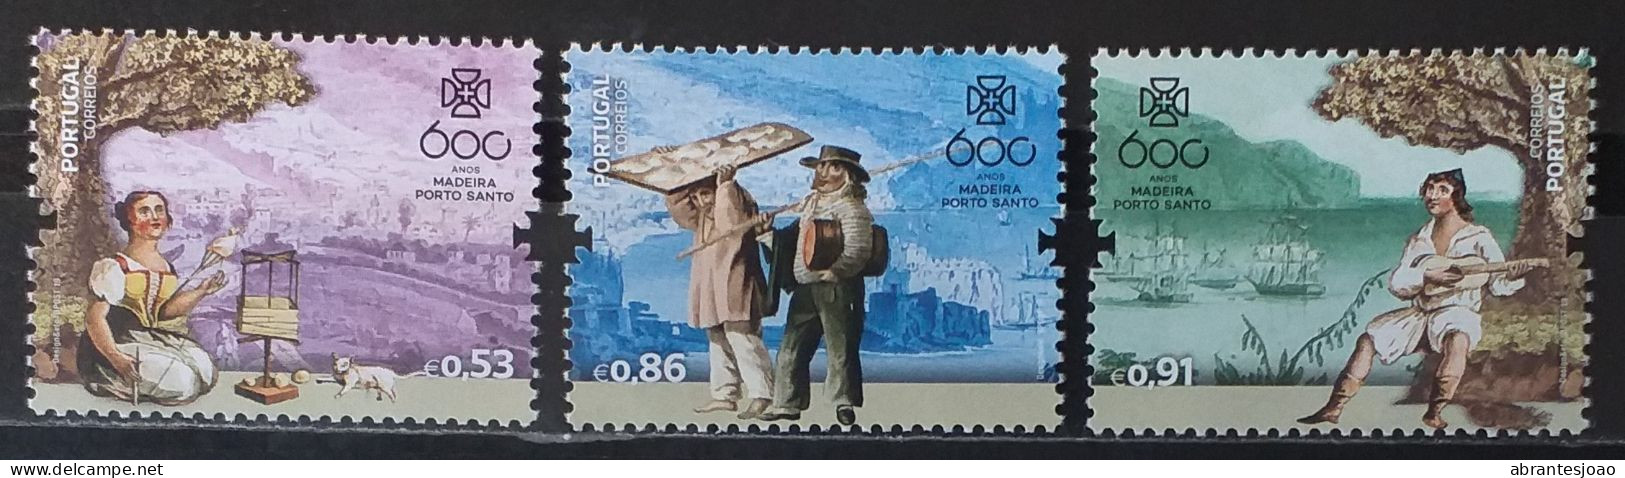 2019 - Portugal - MNH - 600 Years Since Discovery Of Madeira - 3 Stamps - Nuevos